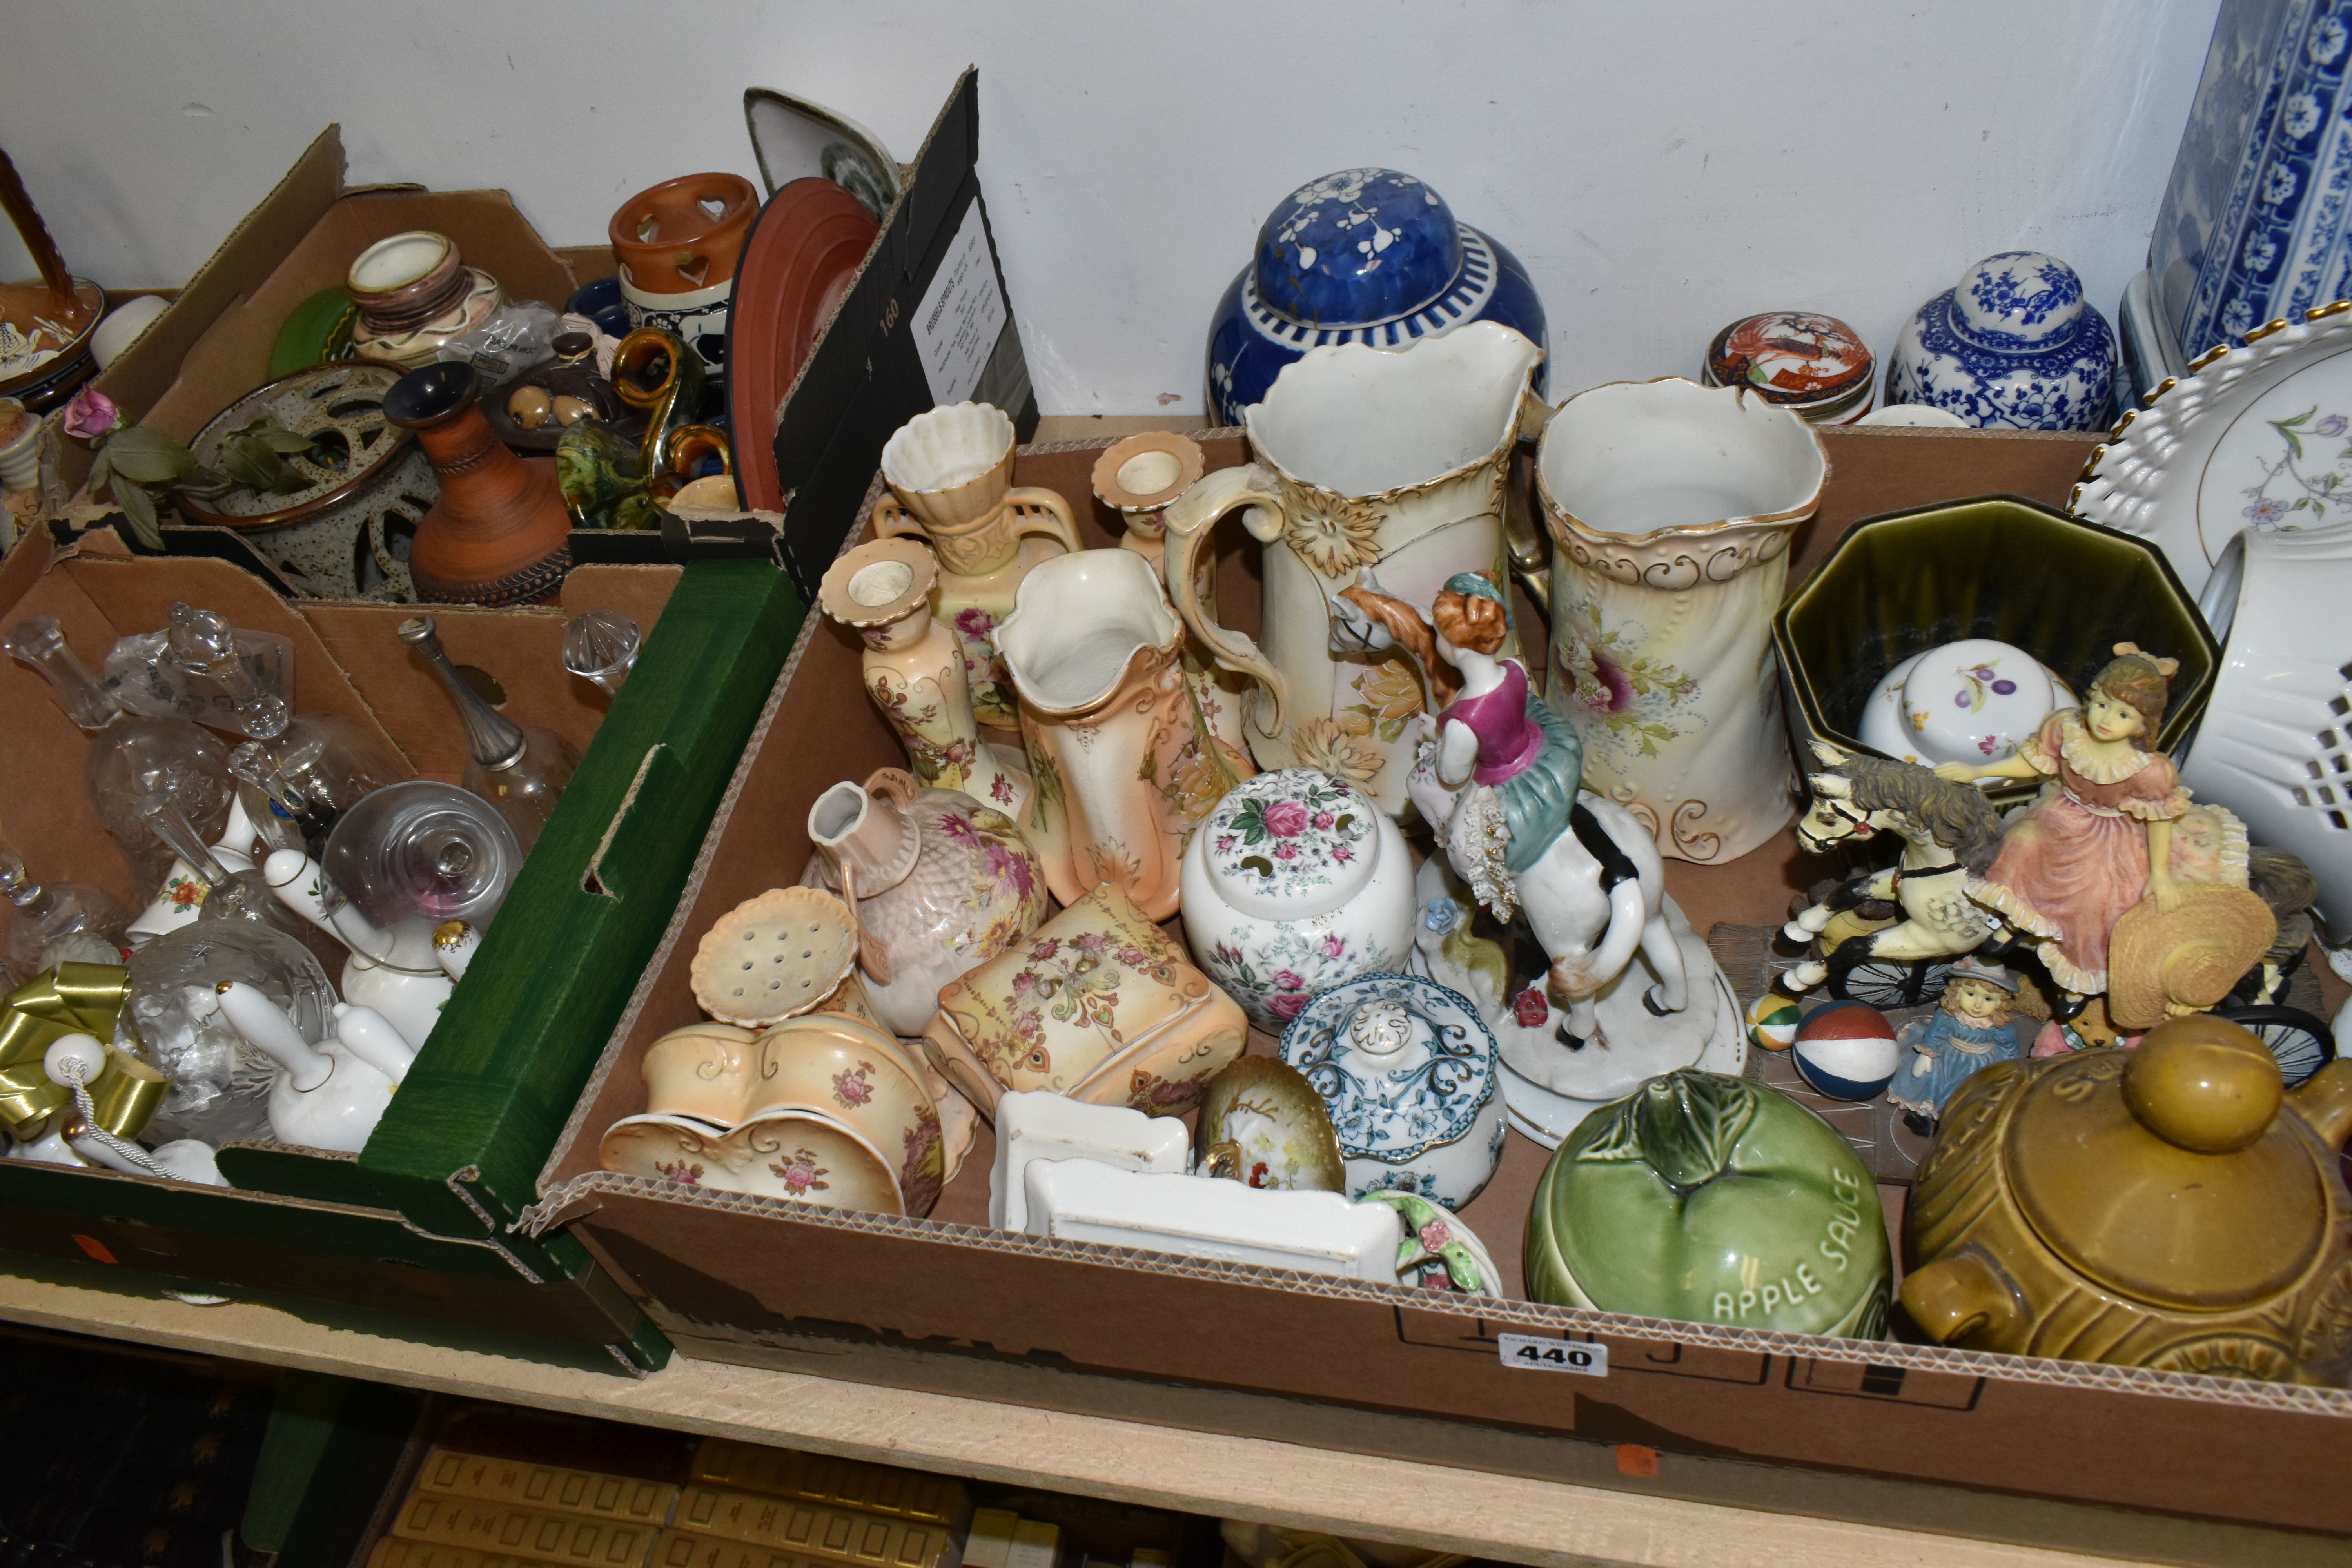 SEVEN BOXES OF CERAMIC ORNAMENTS to include a large collection of ceramic and glass ornamental